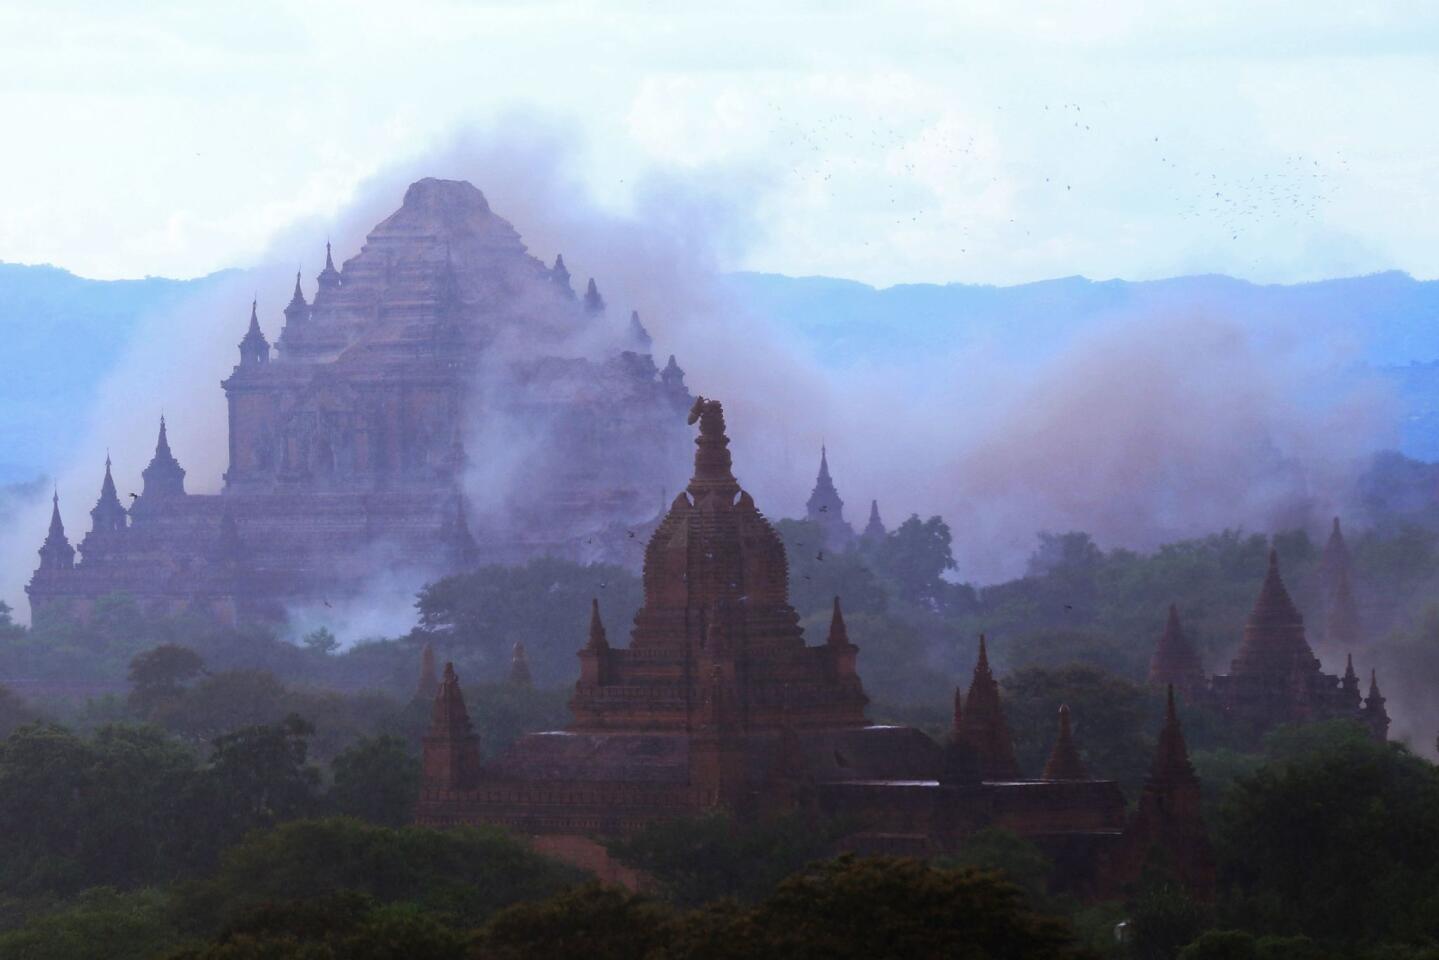 The ancient Dhammayangyi temple is seen shrouded in dust as a 6.8 magnitude earthquake hit Bagan on August 24, 2016.